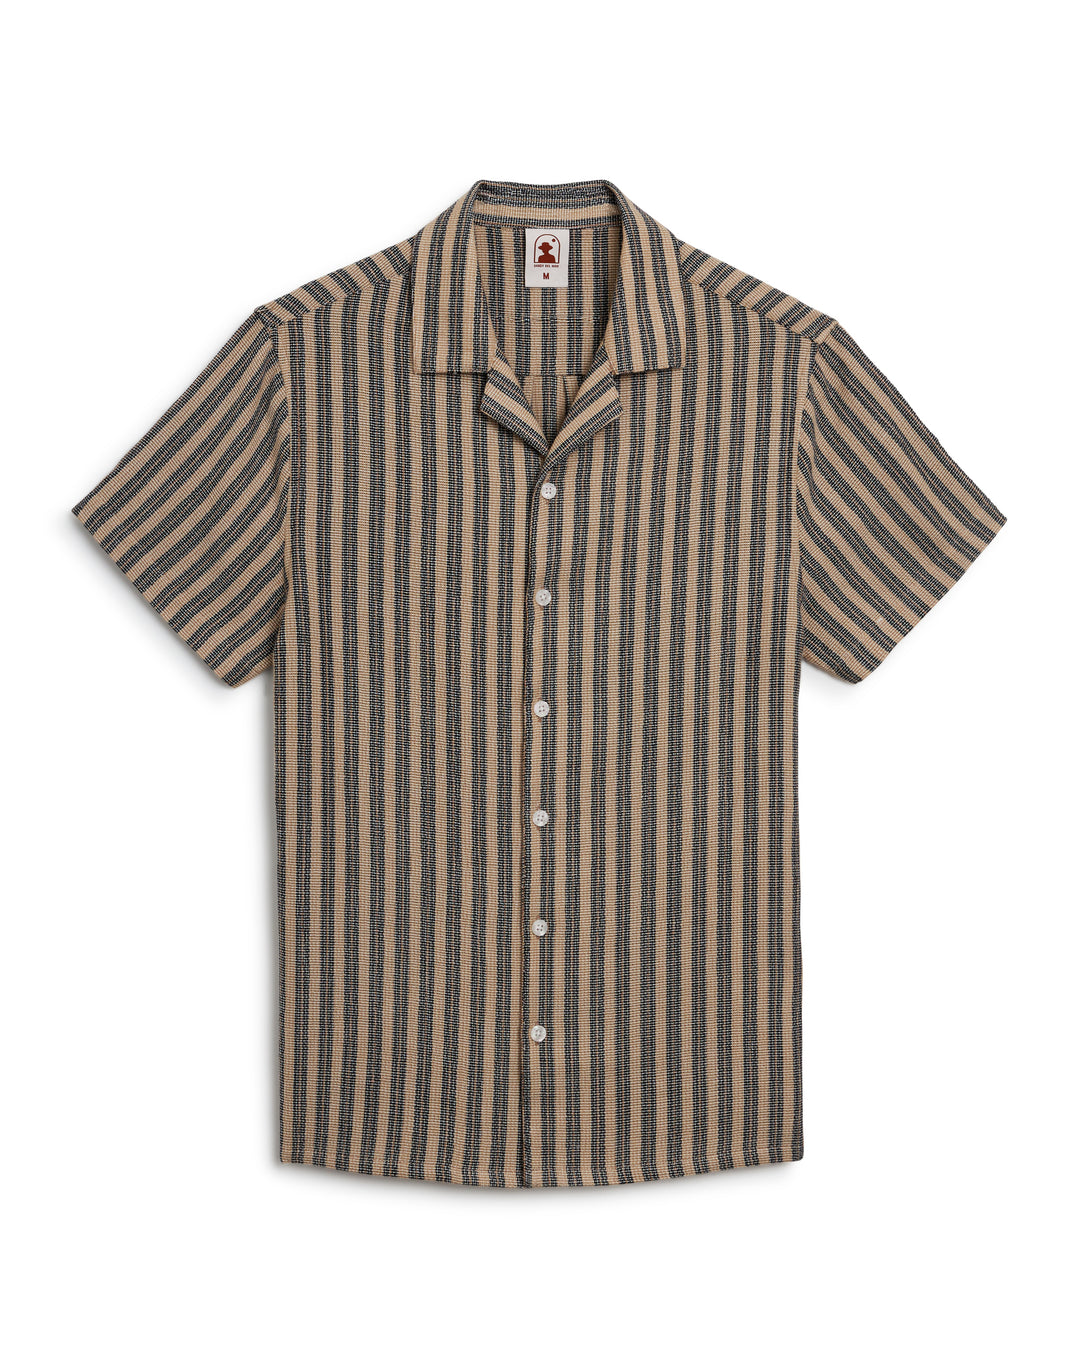 The men's striped Palma shirt in beige and tan is an equatorial essential for a stylish getaway. 
New sentence: The Cacao Stripe Palma Shirt by Dandy Del Mar is an equatorial essential for a stylish getaway.